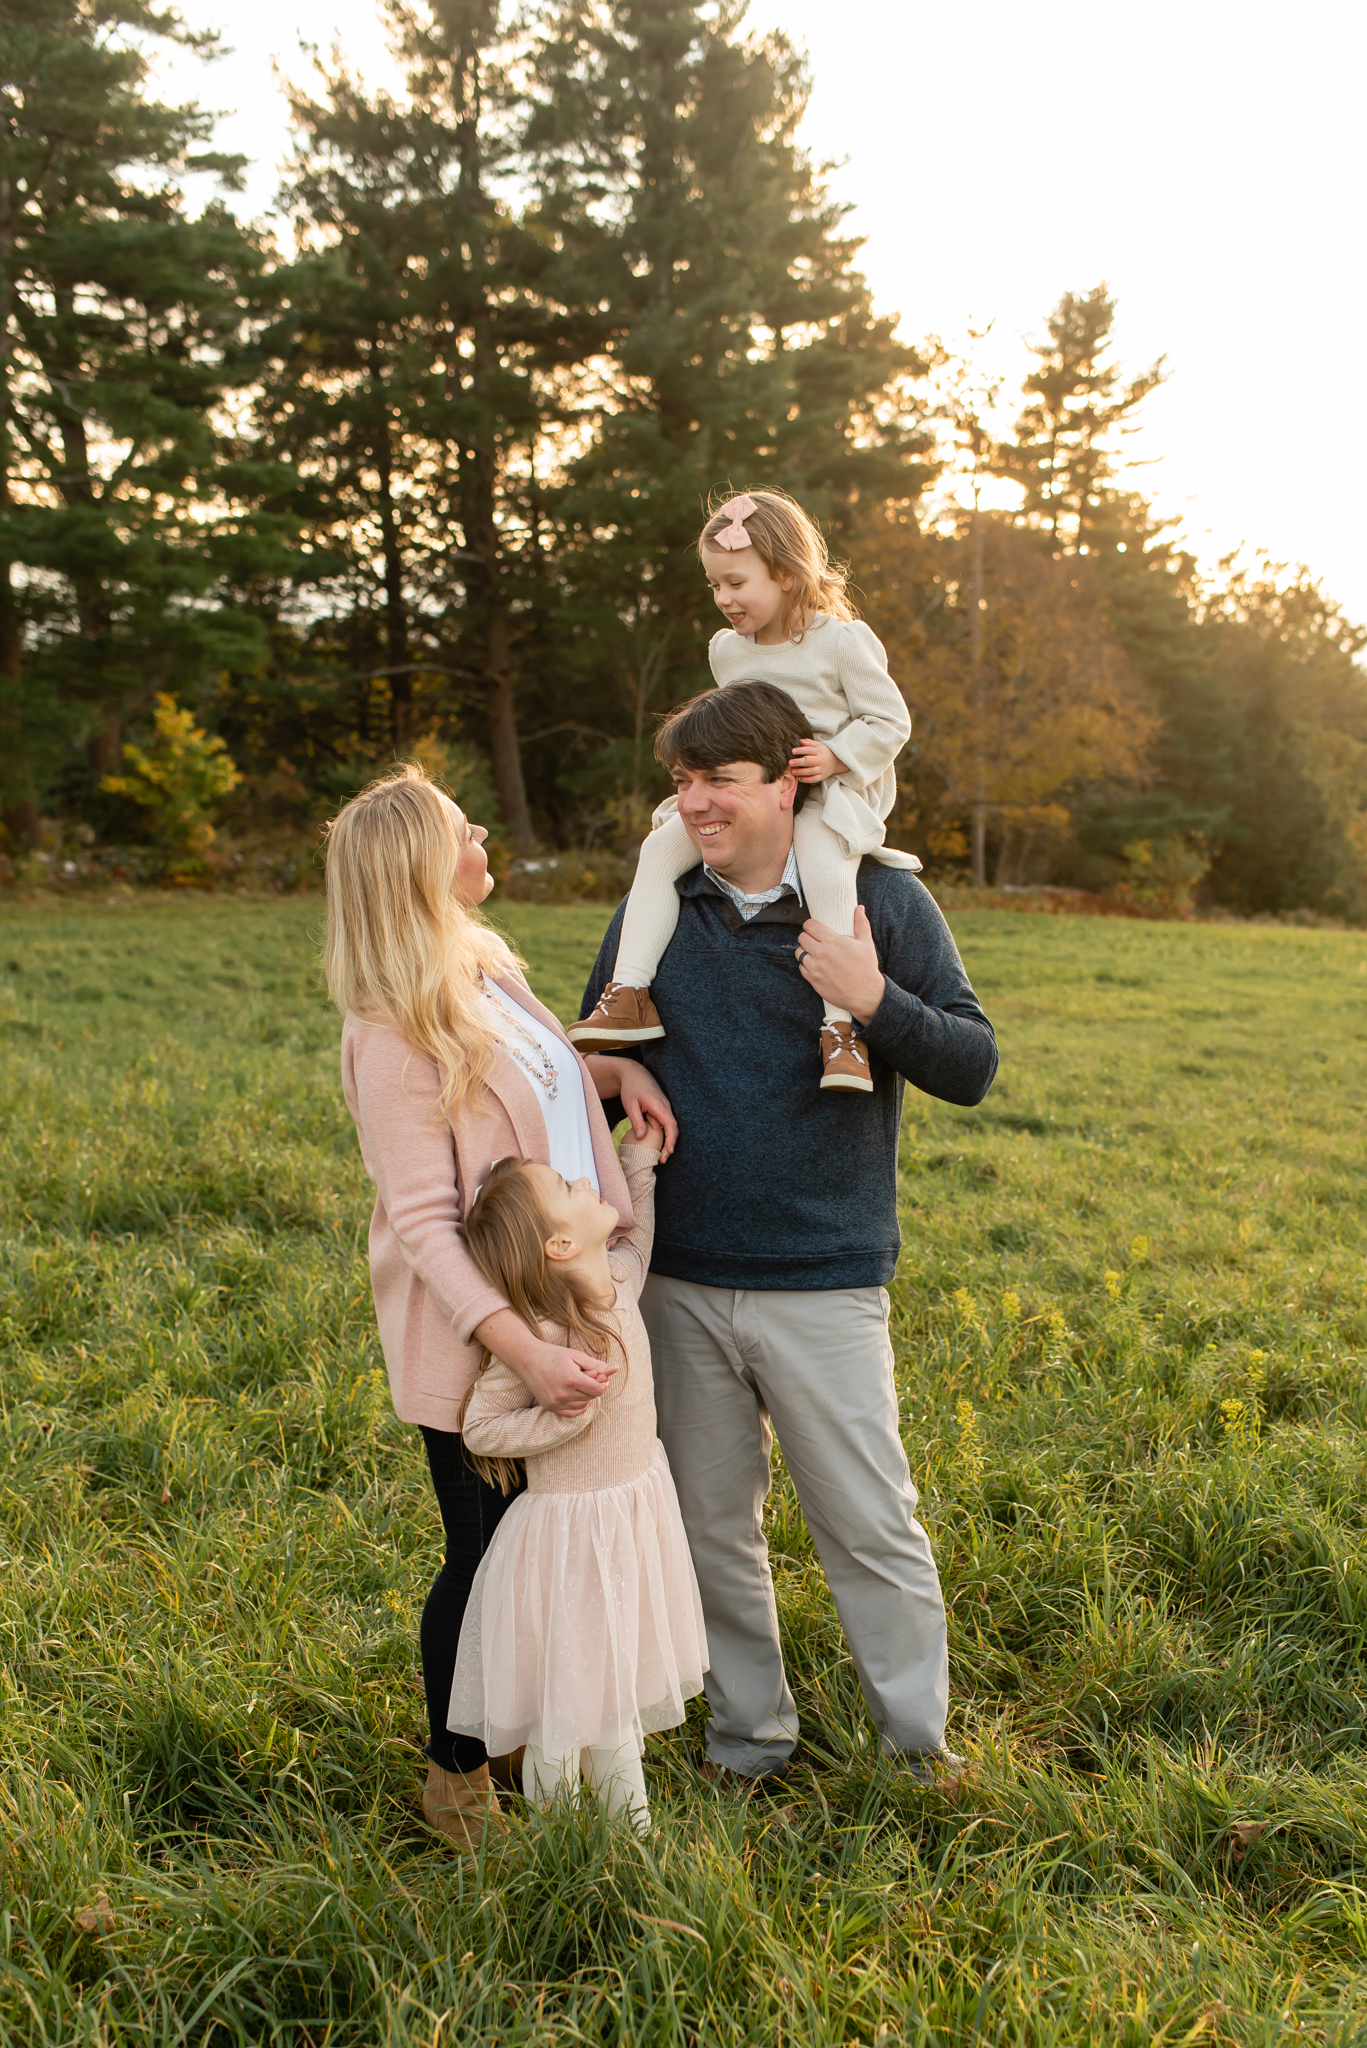 Sharon Leger Photography || Canton, CT Family and Newborn Photographer | Extended family session in Litchfield, Connecticut